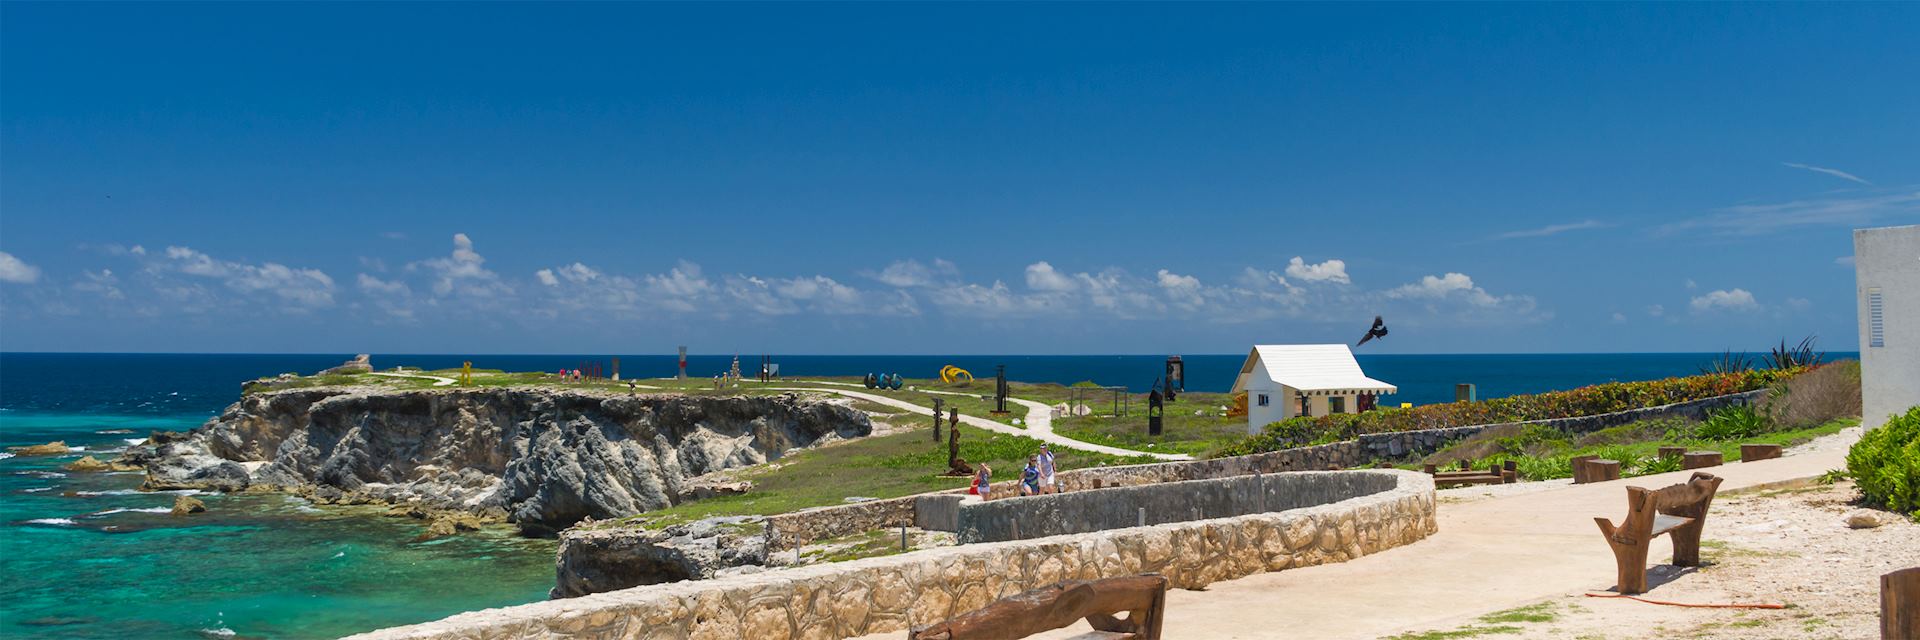 Isla Mujeres Is The Hottest Destination In The Mexican Caribbean